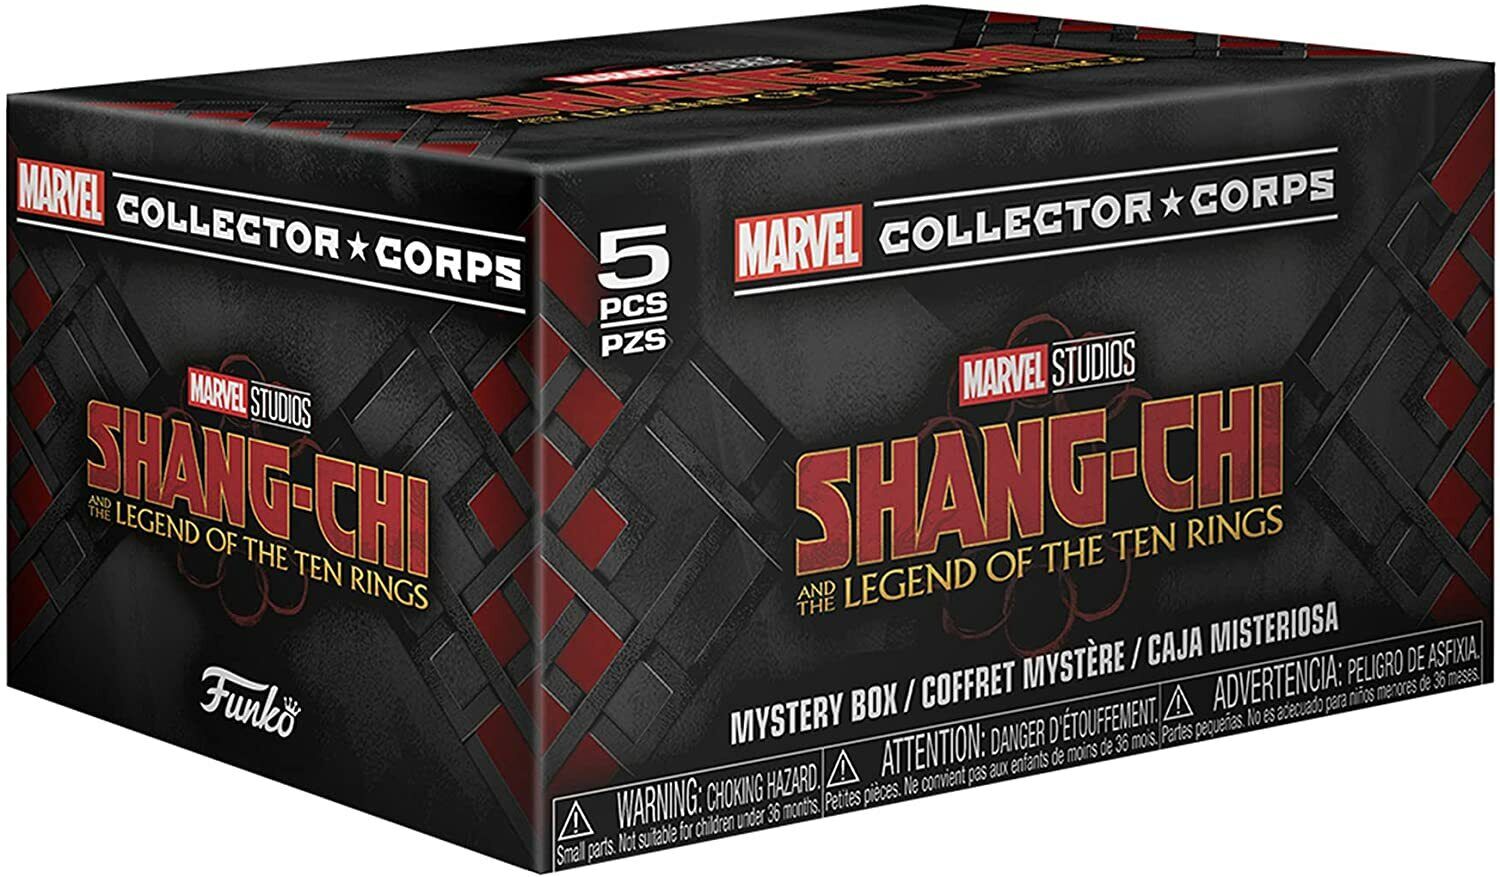 New Funko Pop Marvel Collector Corps SHANG-CHI Box Size 3XL Legend Ten Rings